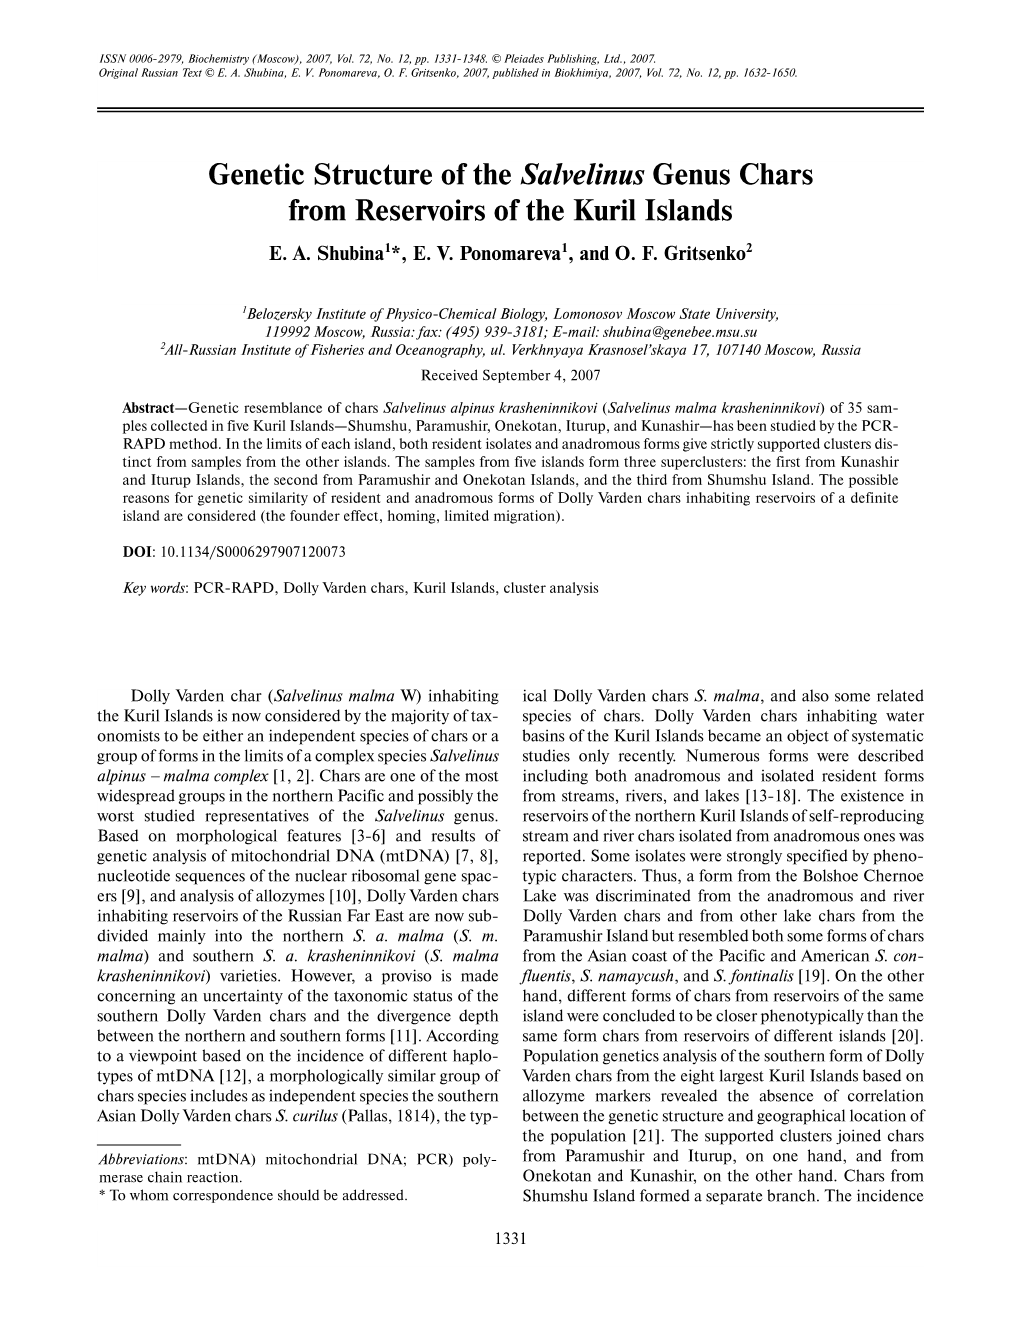 Genetic Structure of the Salvelinus Genus Chars from Reservoirs of the Kuril Islands E